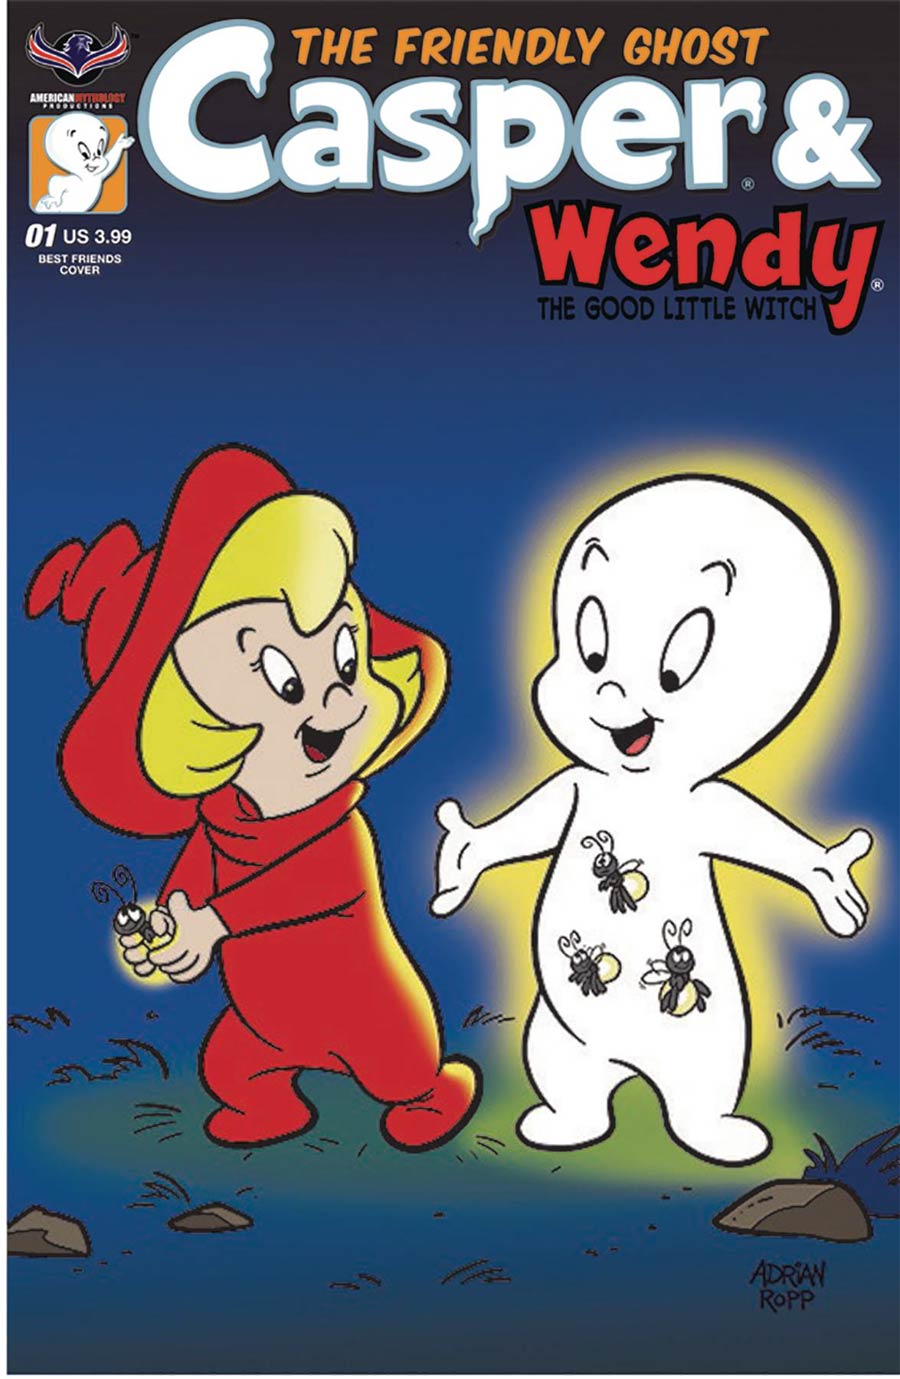 Casper And Wendy #1 Cover C Variant Adrian Ropp Best Friends Cover